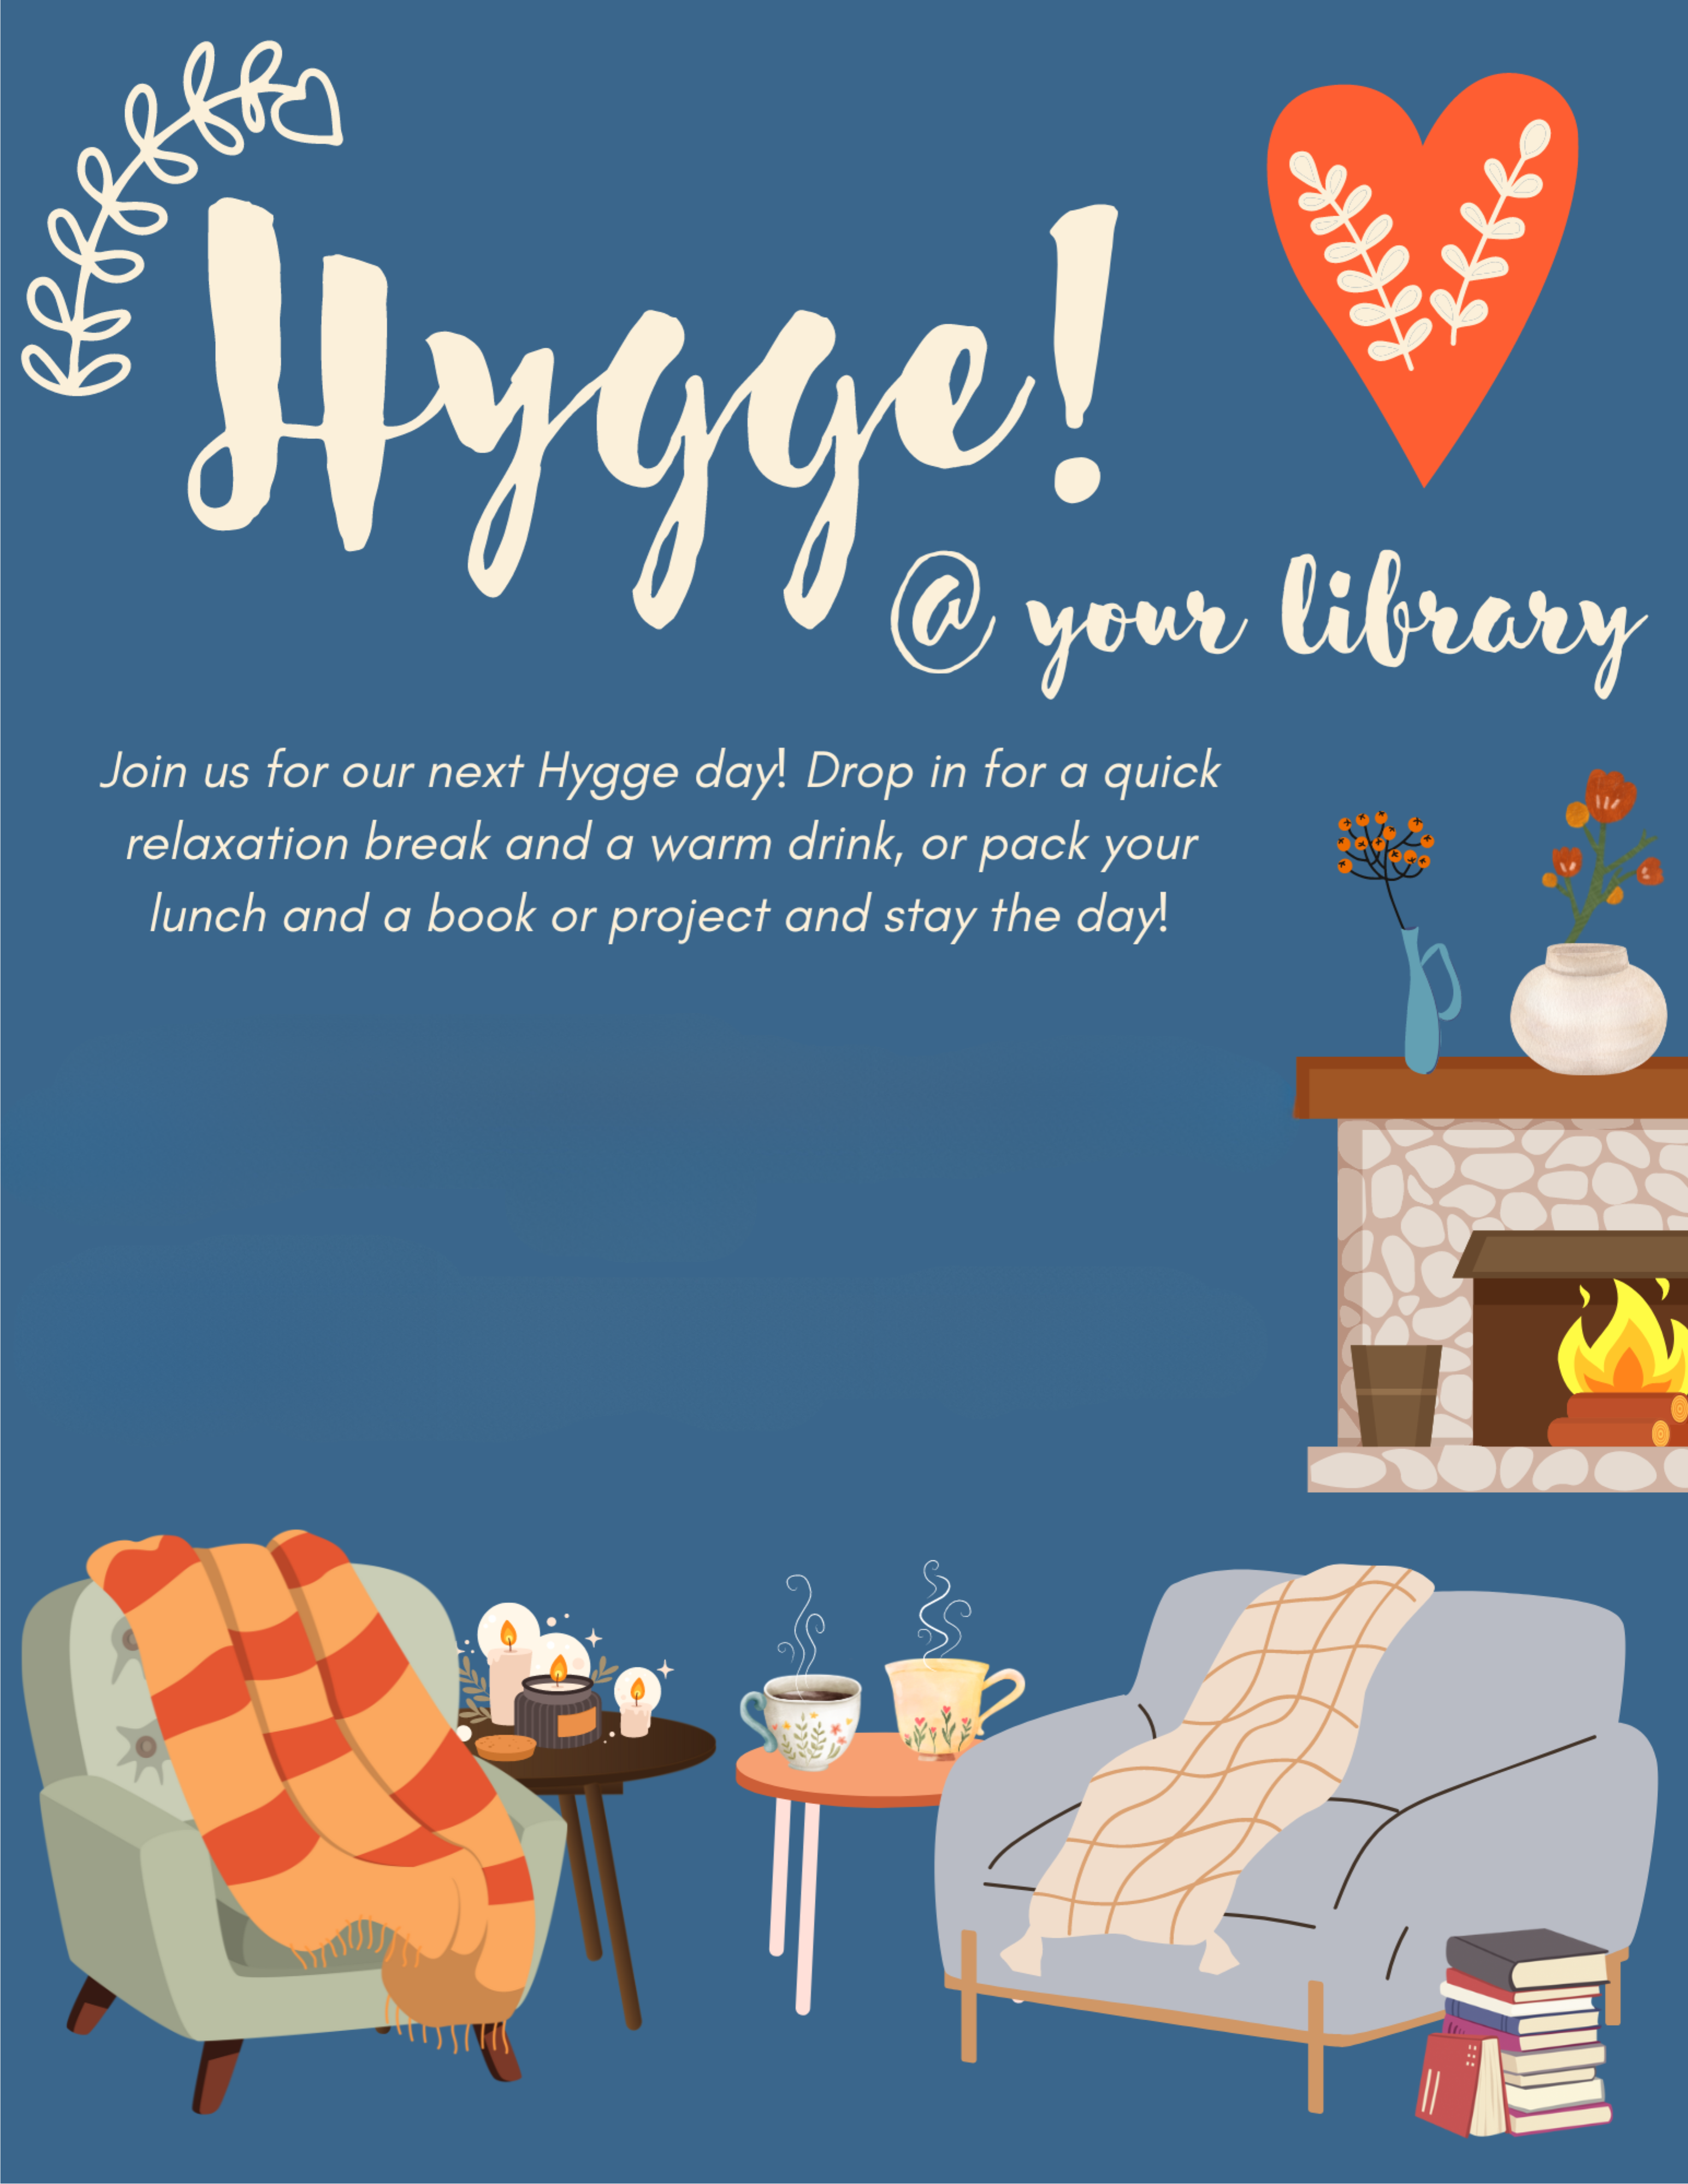 heart cozy chair fire tea books in a stack Hygge!